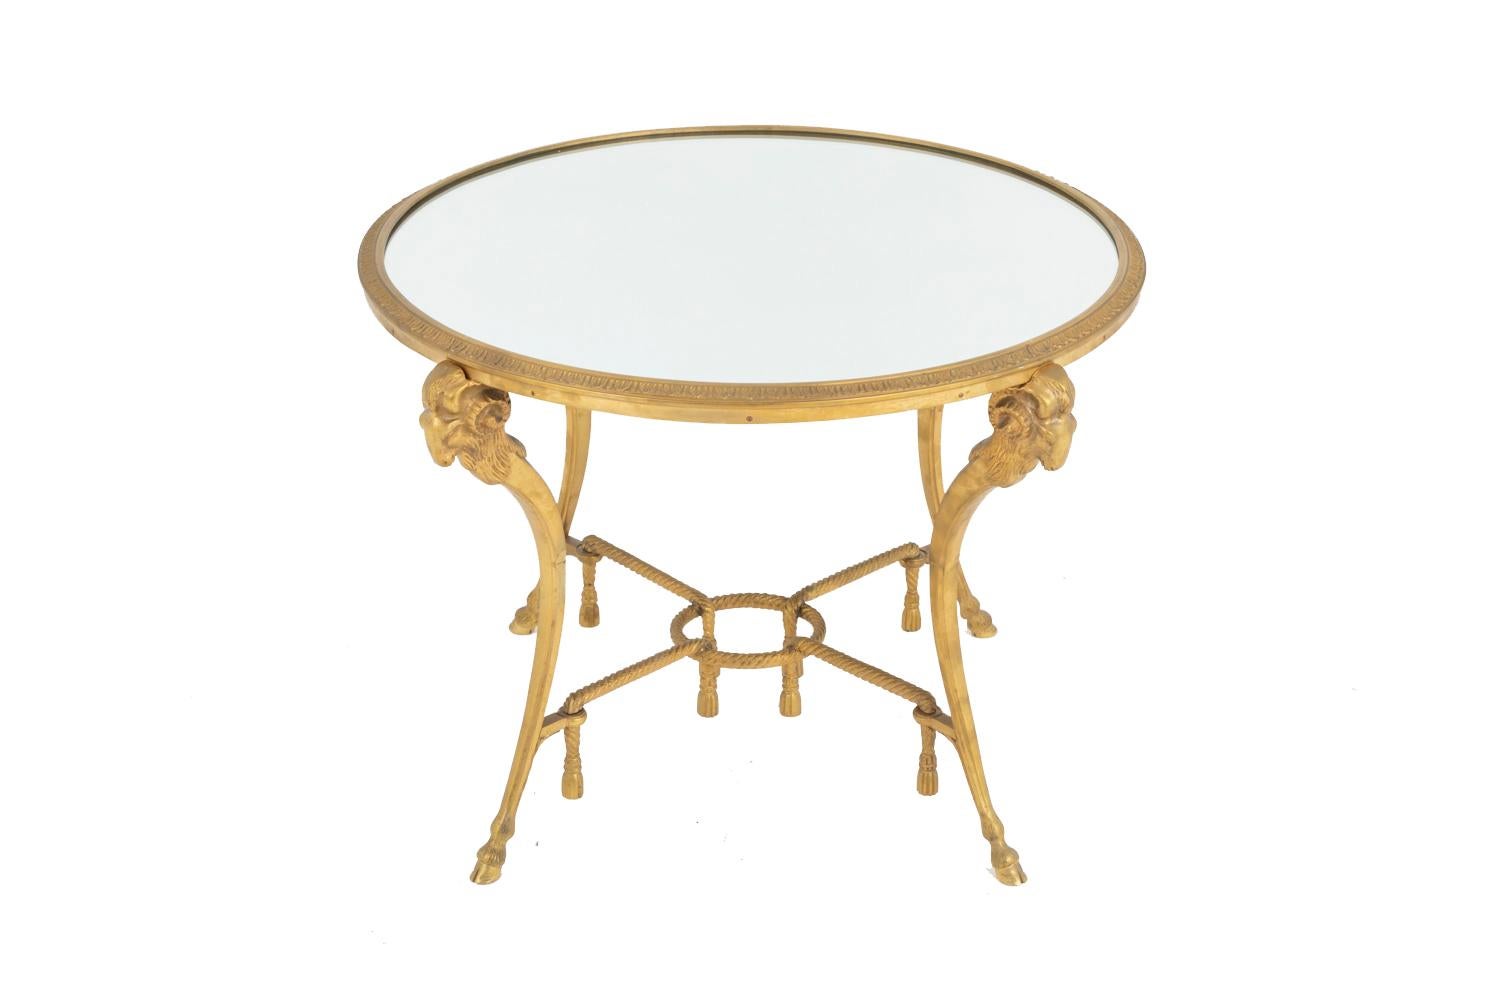 Directoire style round end table in chiseled and gilt bronze. It stands on four saber legs ending in hoof feet et adorned with a ram head on the upper part. Legs are joined by an X-shaped stretcher imitating twisted rope and decorated with acorns.